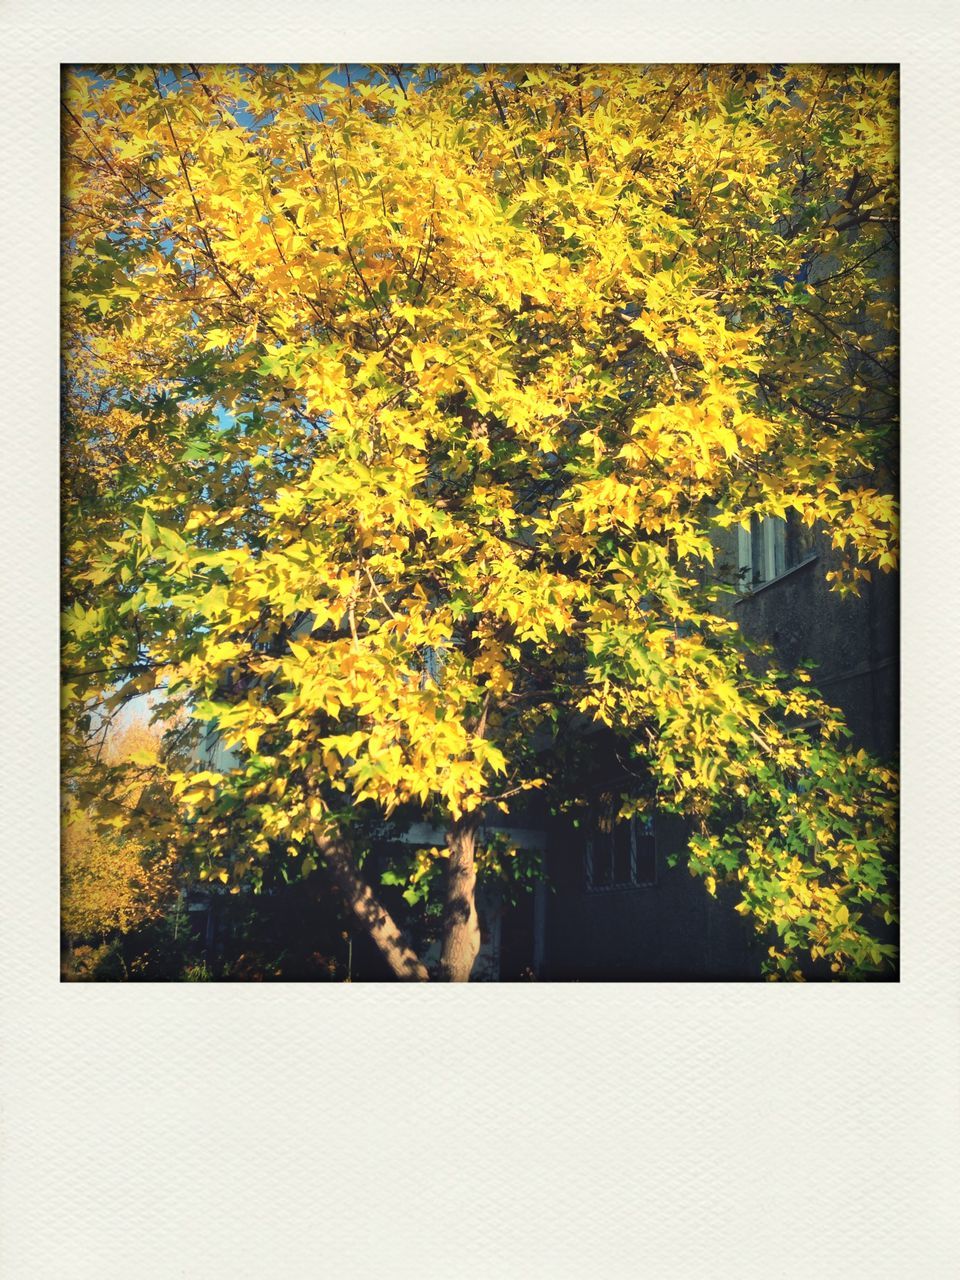 yellow, tree, growth, transfer print, autumn, beauty in nature, season, nature, change, leaf, auto post production filter, tranquility, branch, outdoors, no people, day, green color, sunlight, lush foliage, field